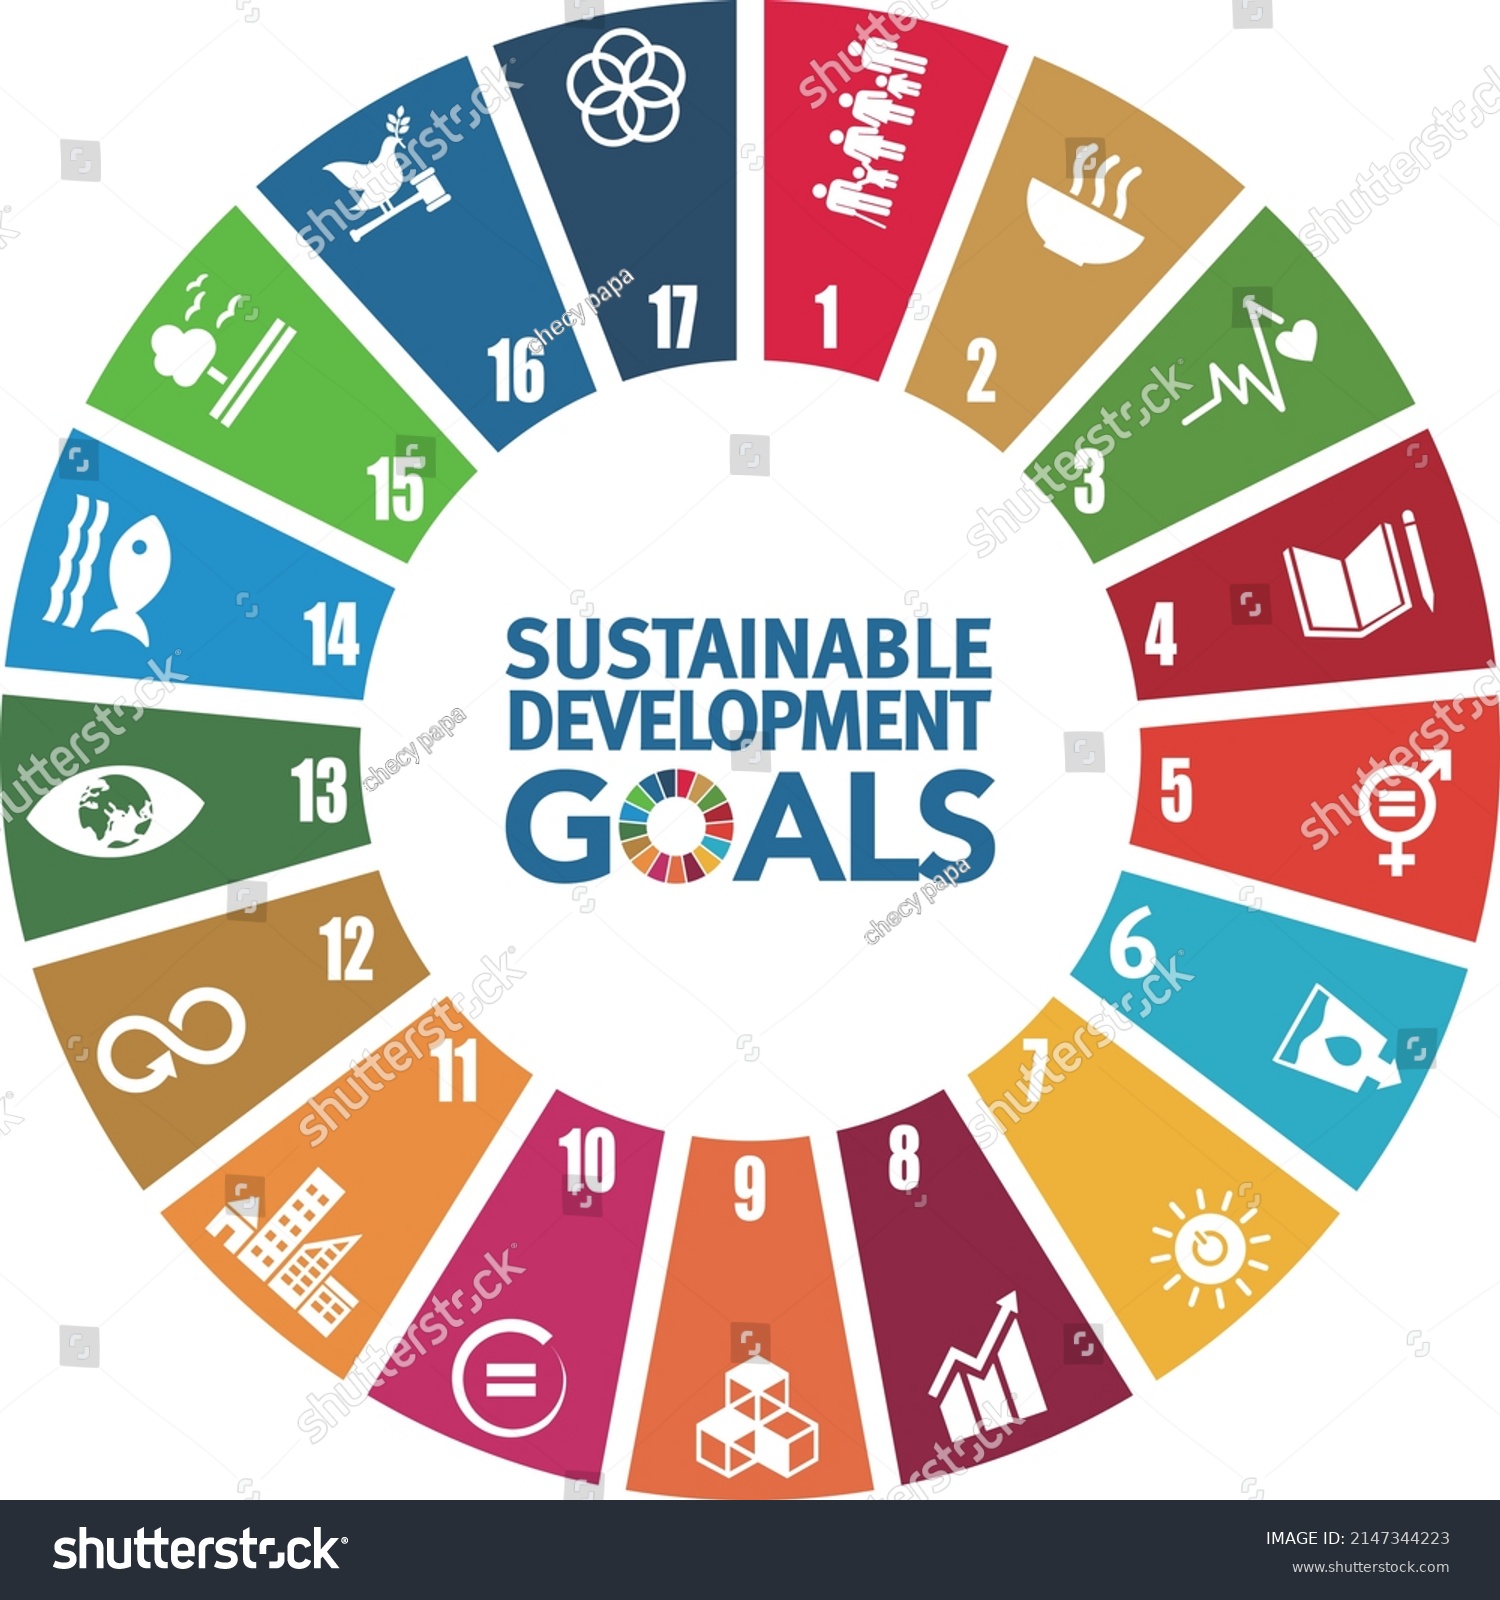 Goals for addressing poverty worldwide and realizing sustainable development. Circle SDGs #2147344223